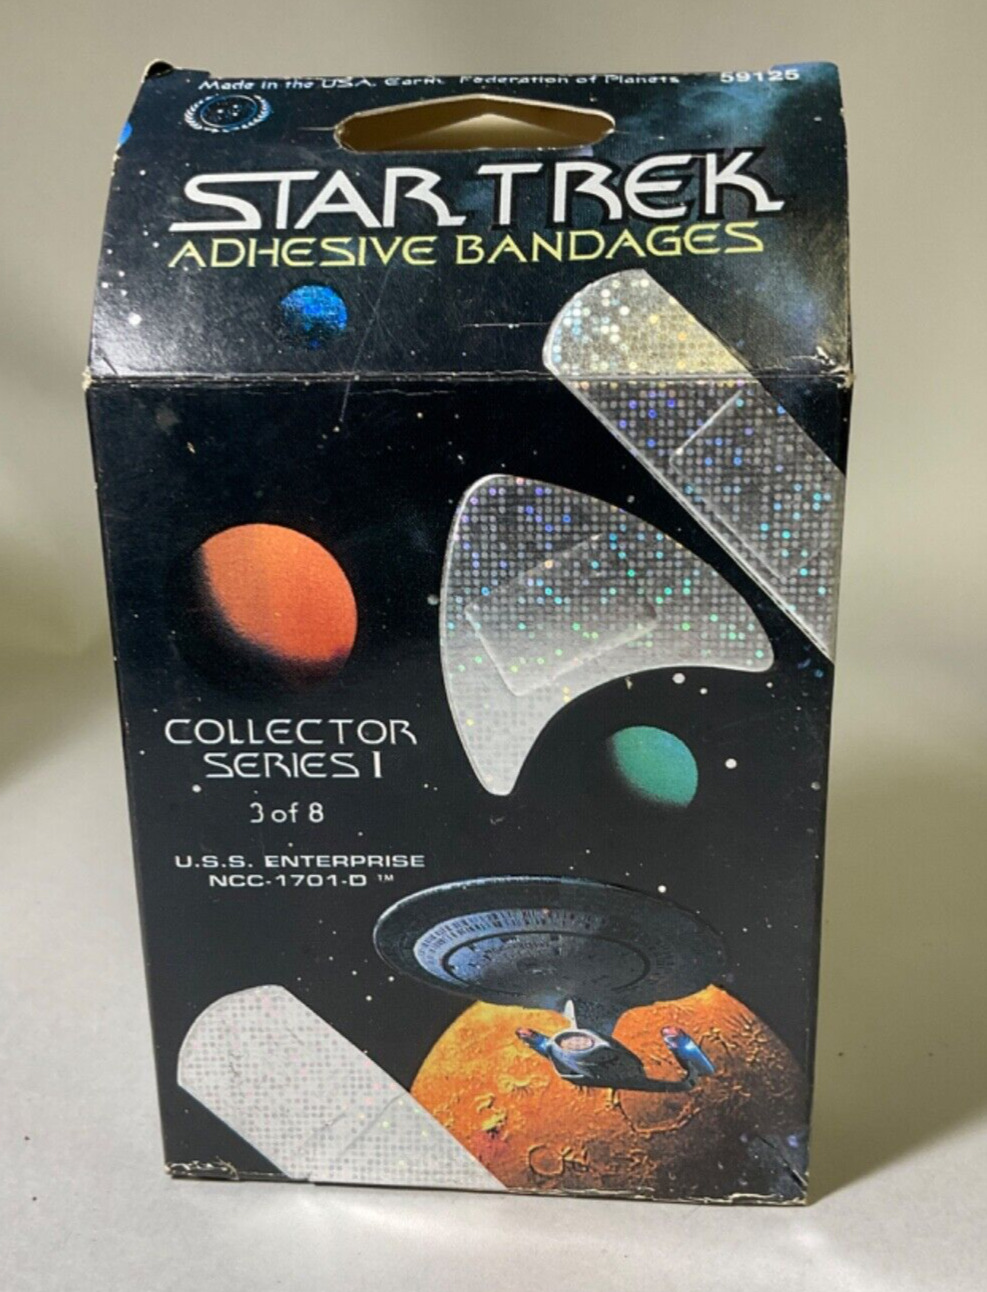 Star Trek Adhesive Bandages Collector Series I from 1997 3 of 8